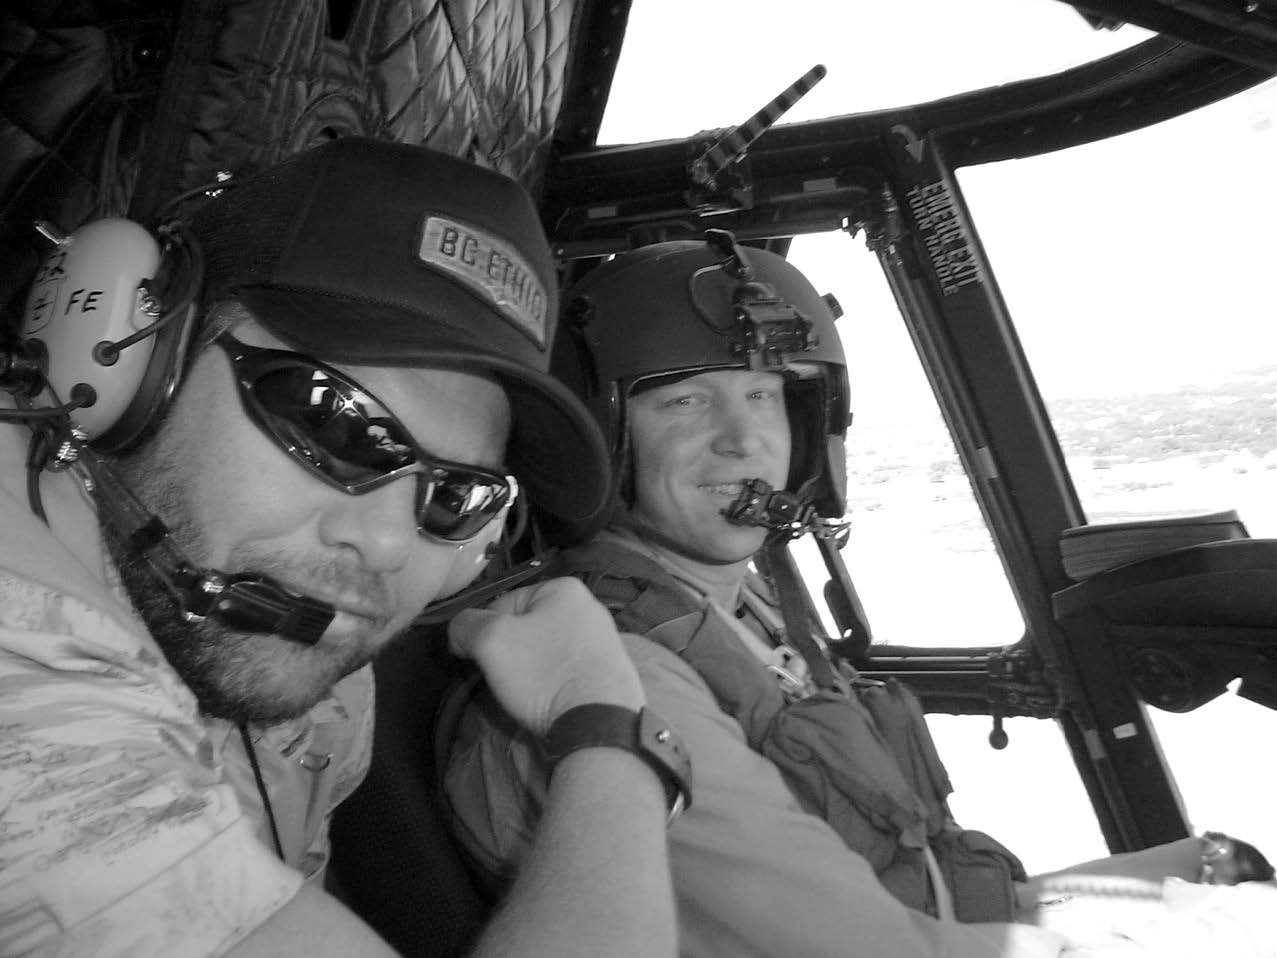 Captain Richard Holling and country singer Toby Keith are shown flying from Kabul to Bagram, Afghanistan, on June 3, 2004. Toby Keith was visiting National Guard soldiers from his home state of Oklahoma. Courtesy of Richard Bratt.